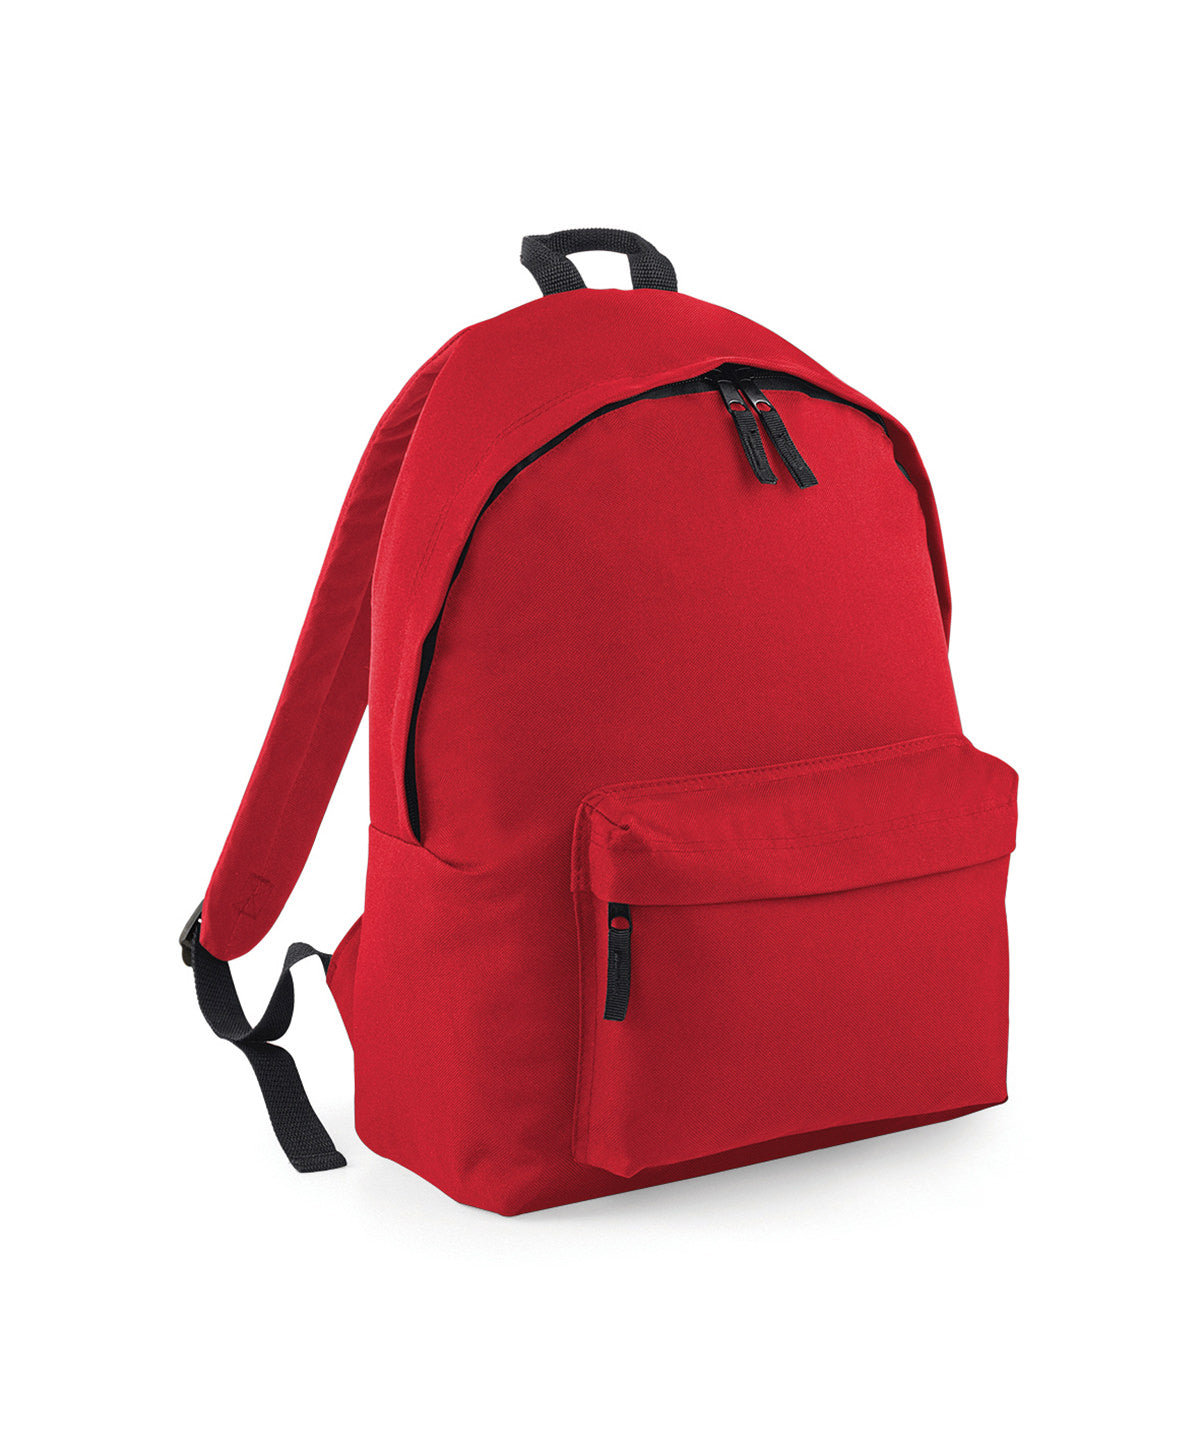 Personalised Bags - Mid Red Bagbase Original fashion backpack